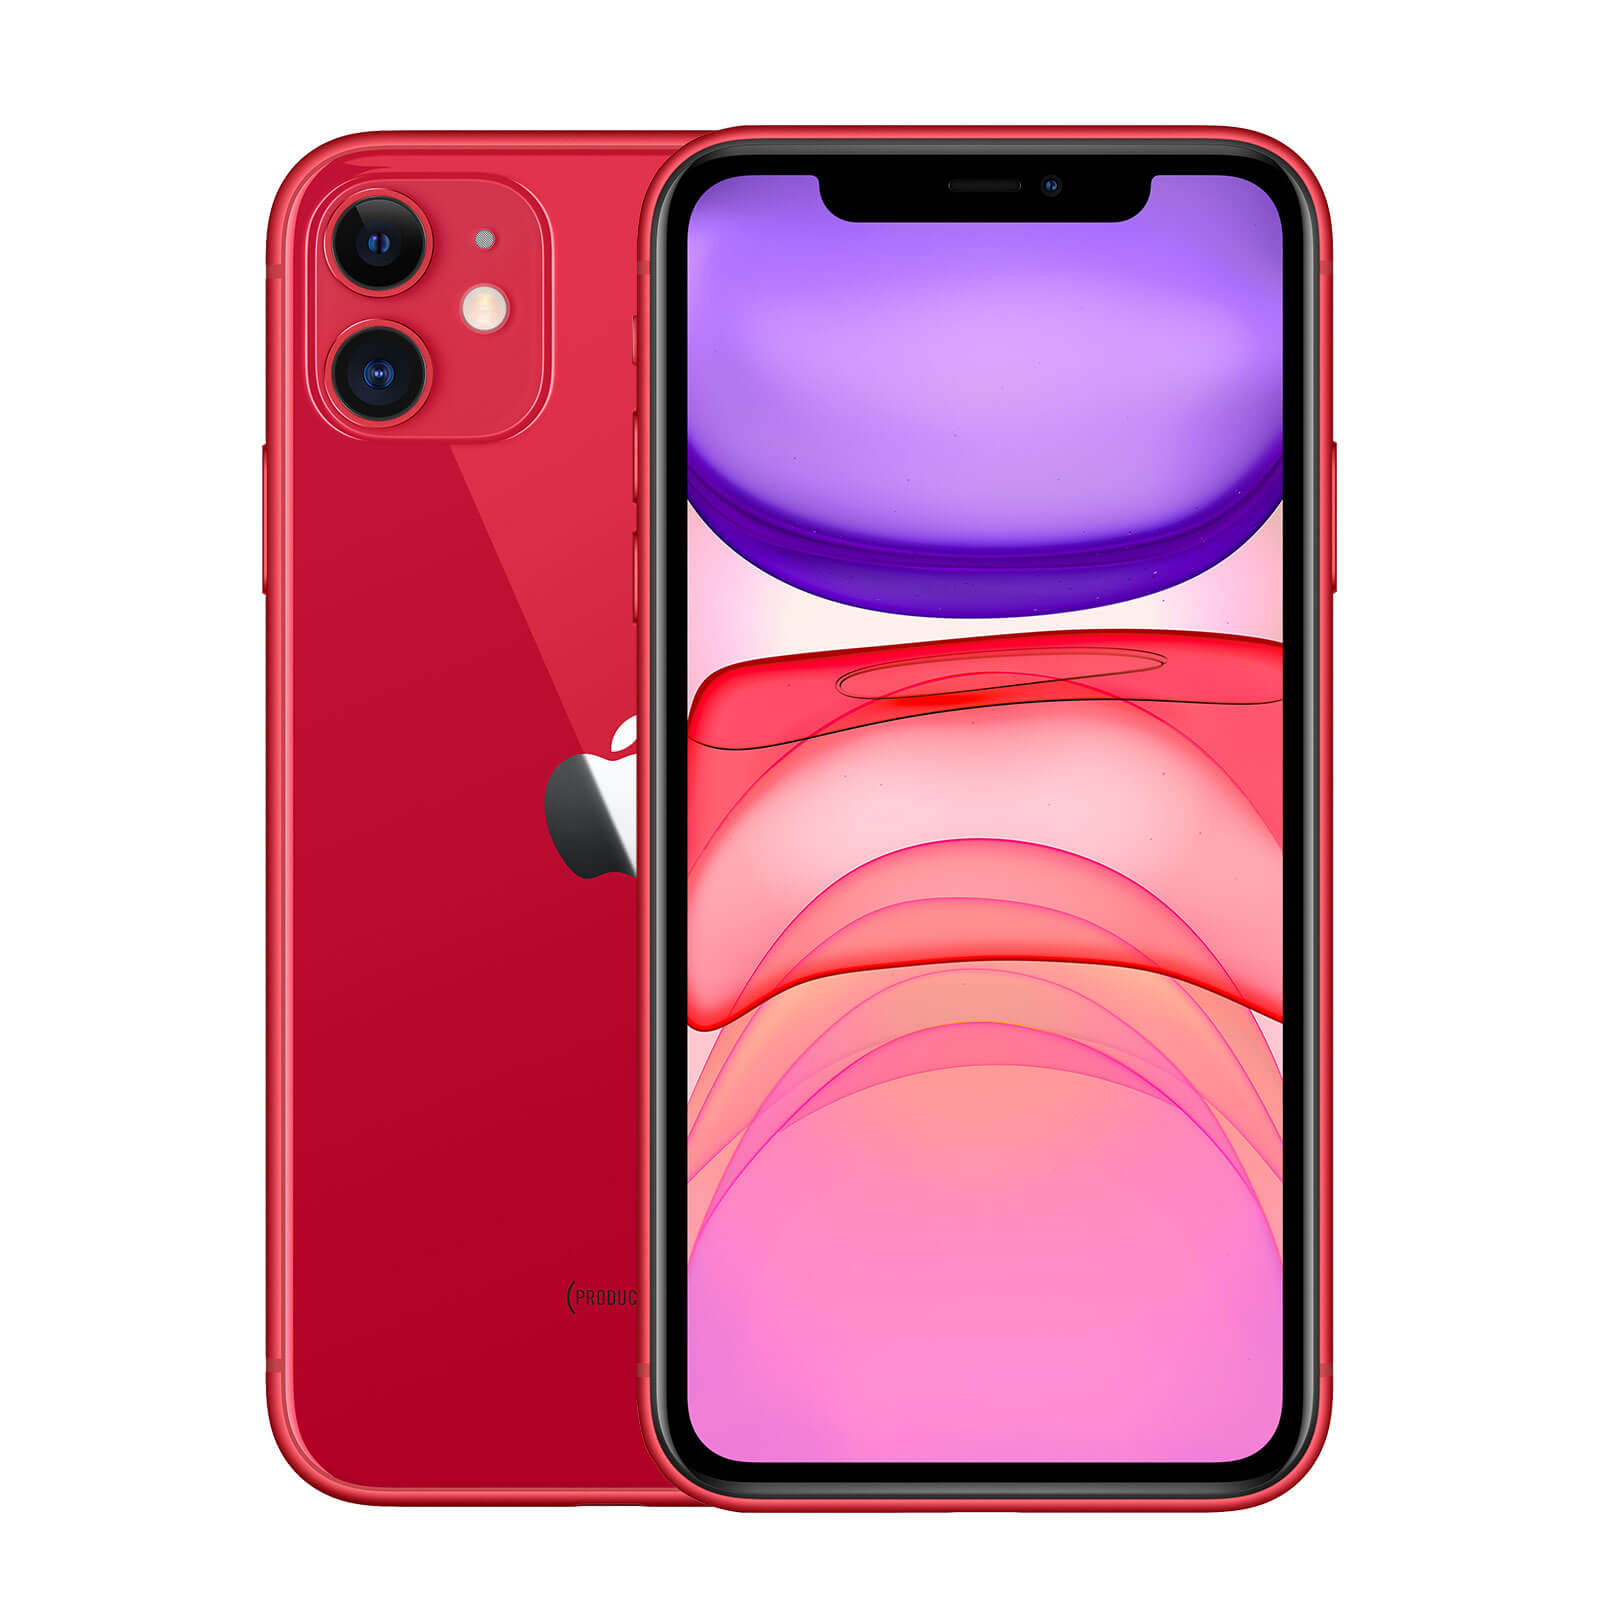 Apple iPhone 11 64GB Product Red Fair - AT&T